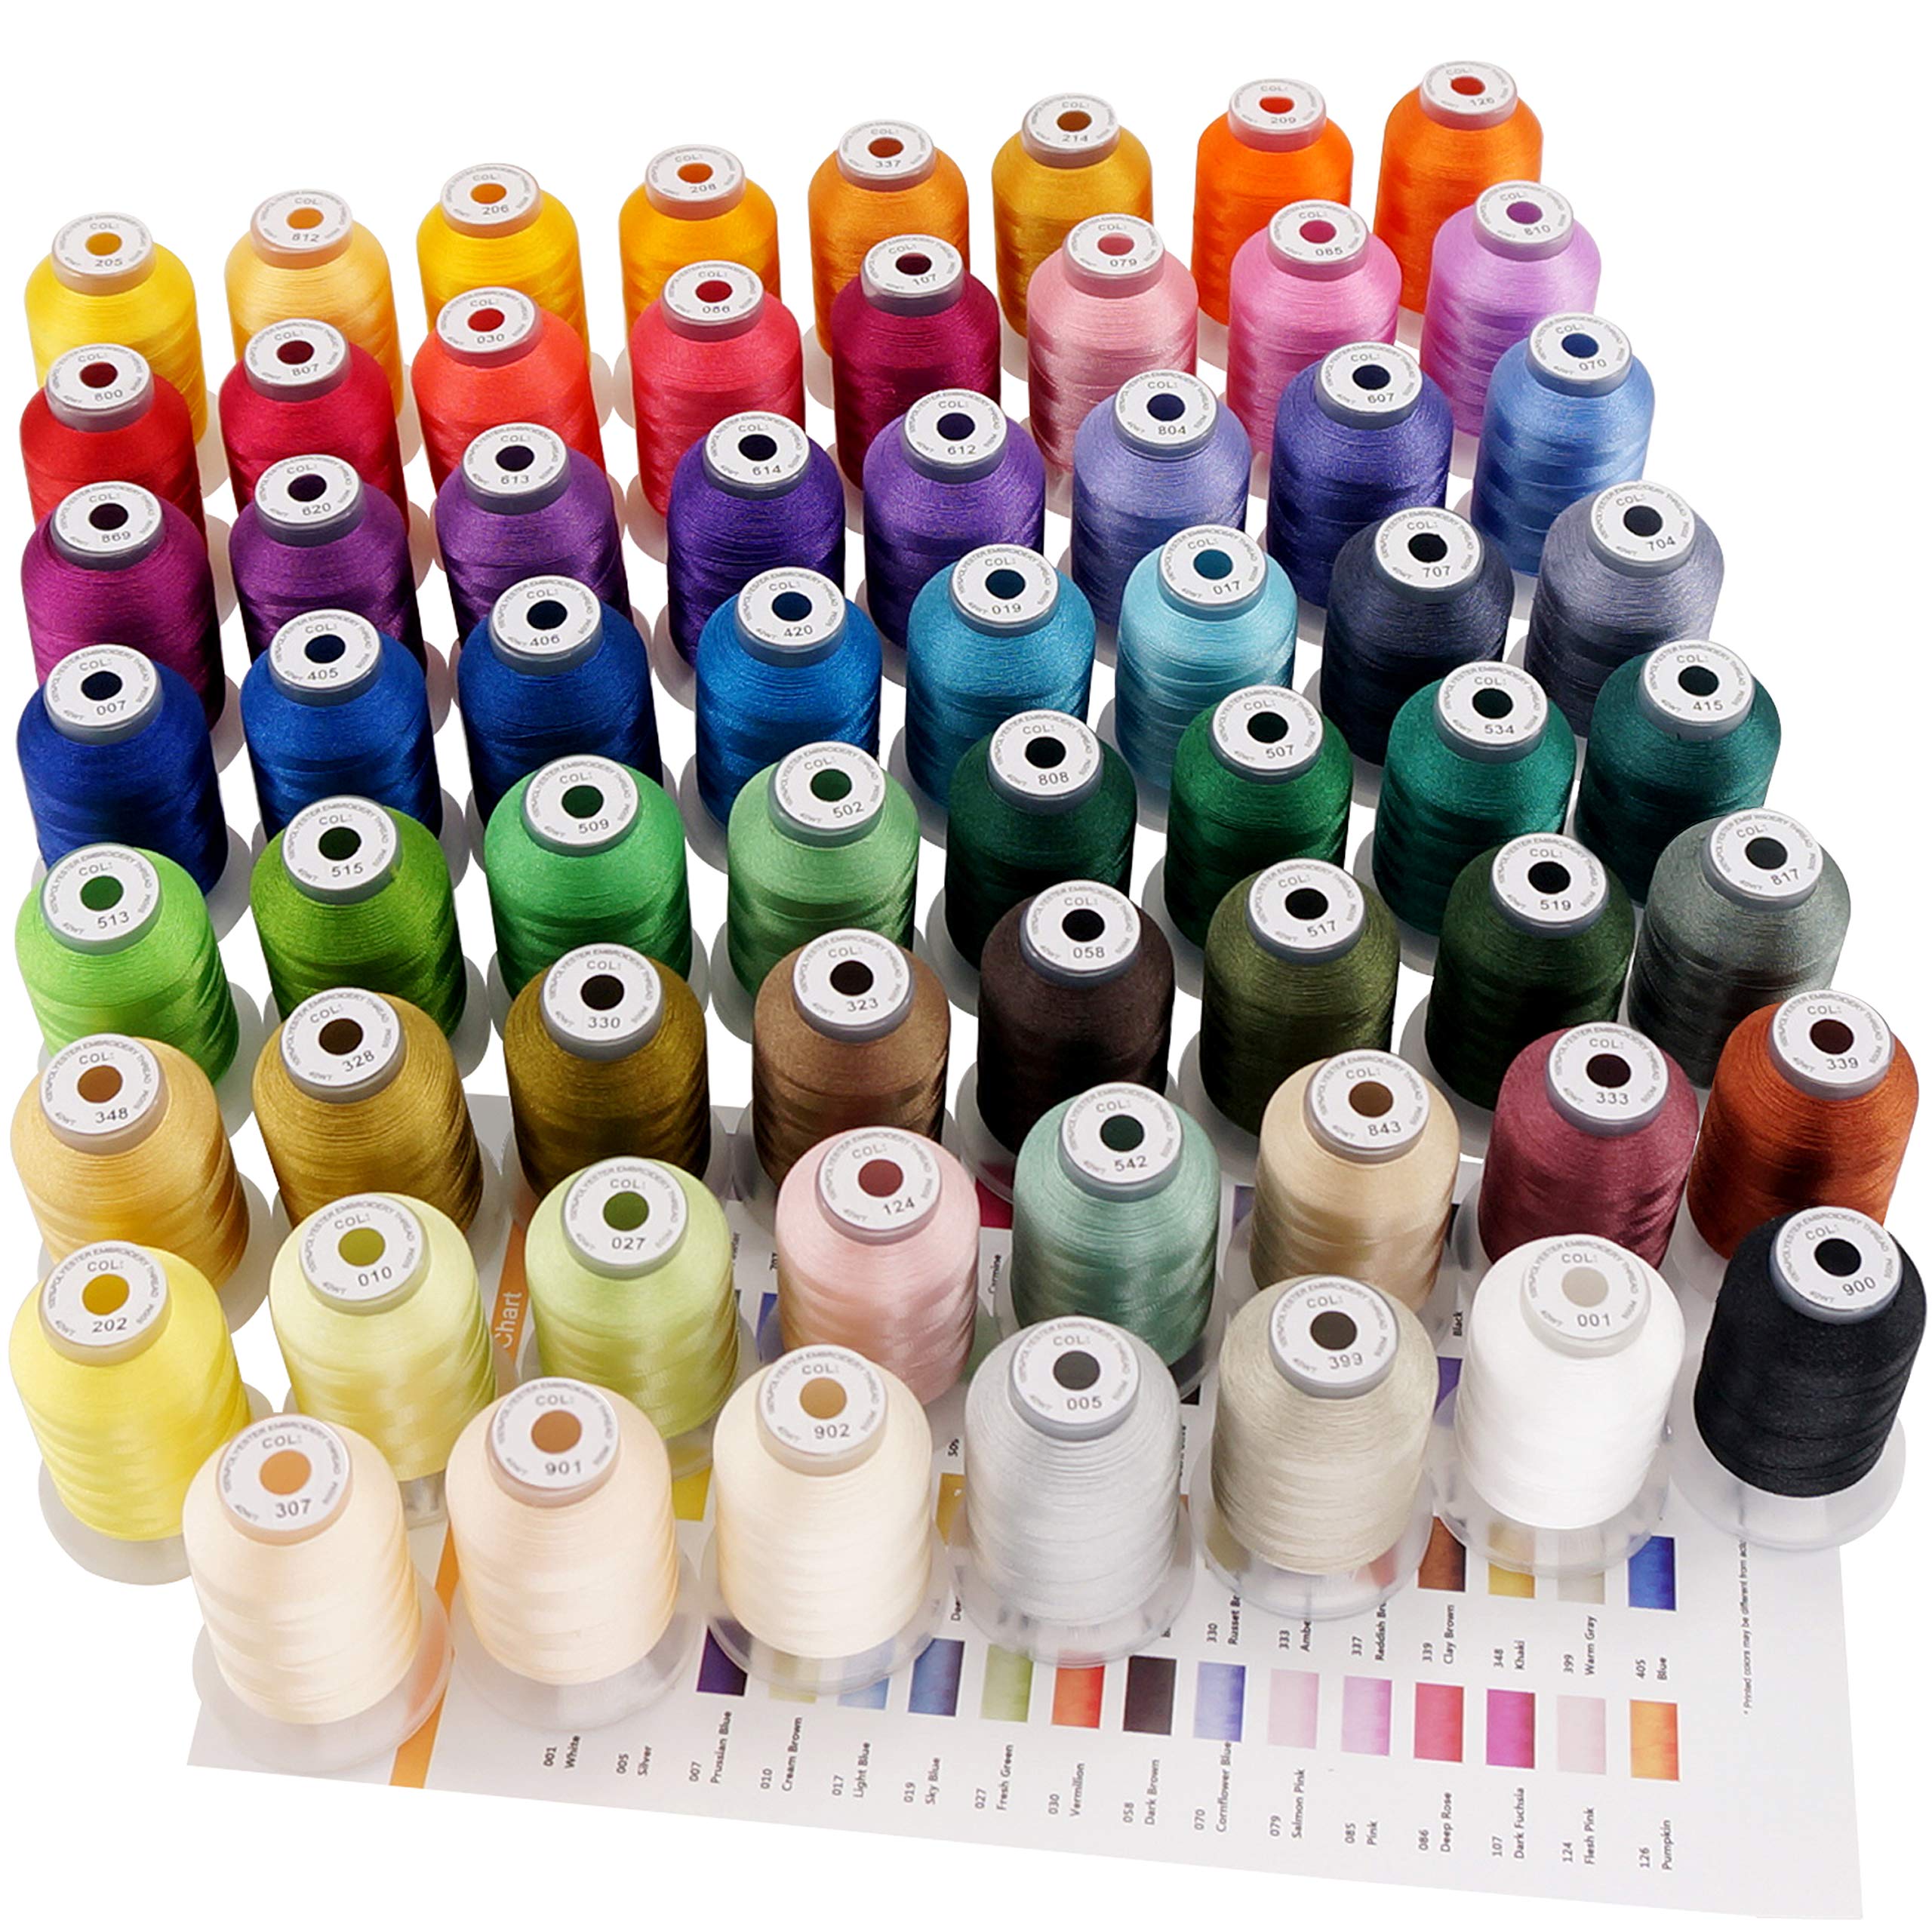 New brothread Embroidery Machine Thread Kit Including 40 Brother Color